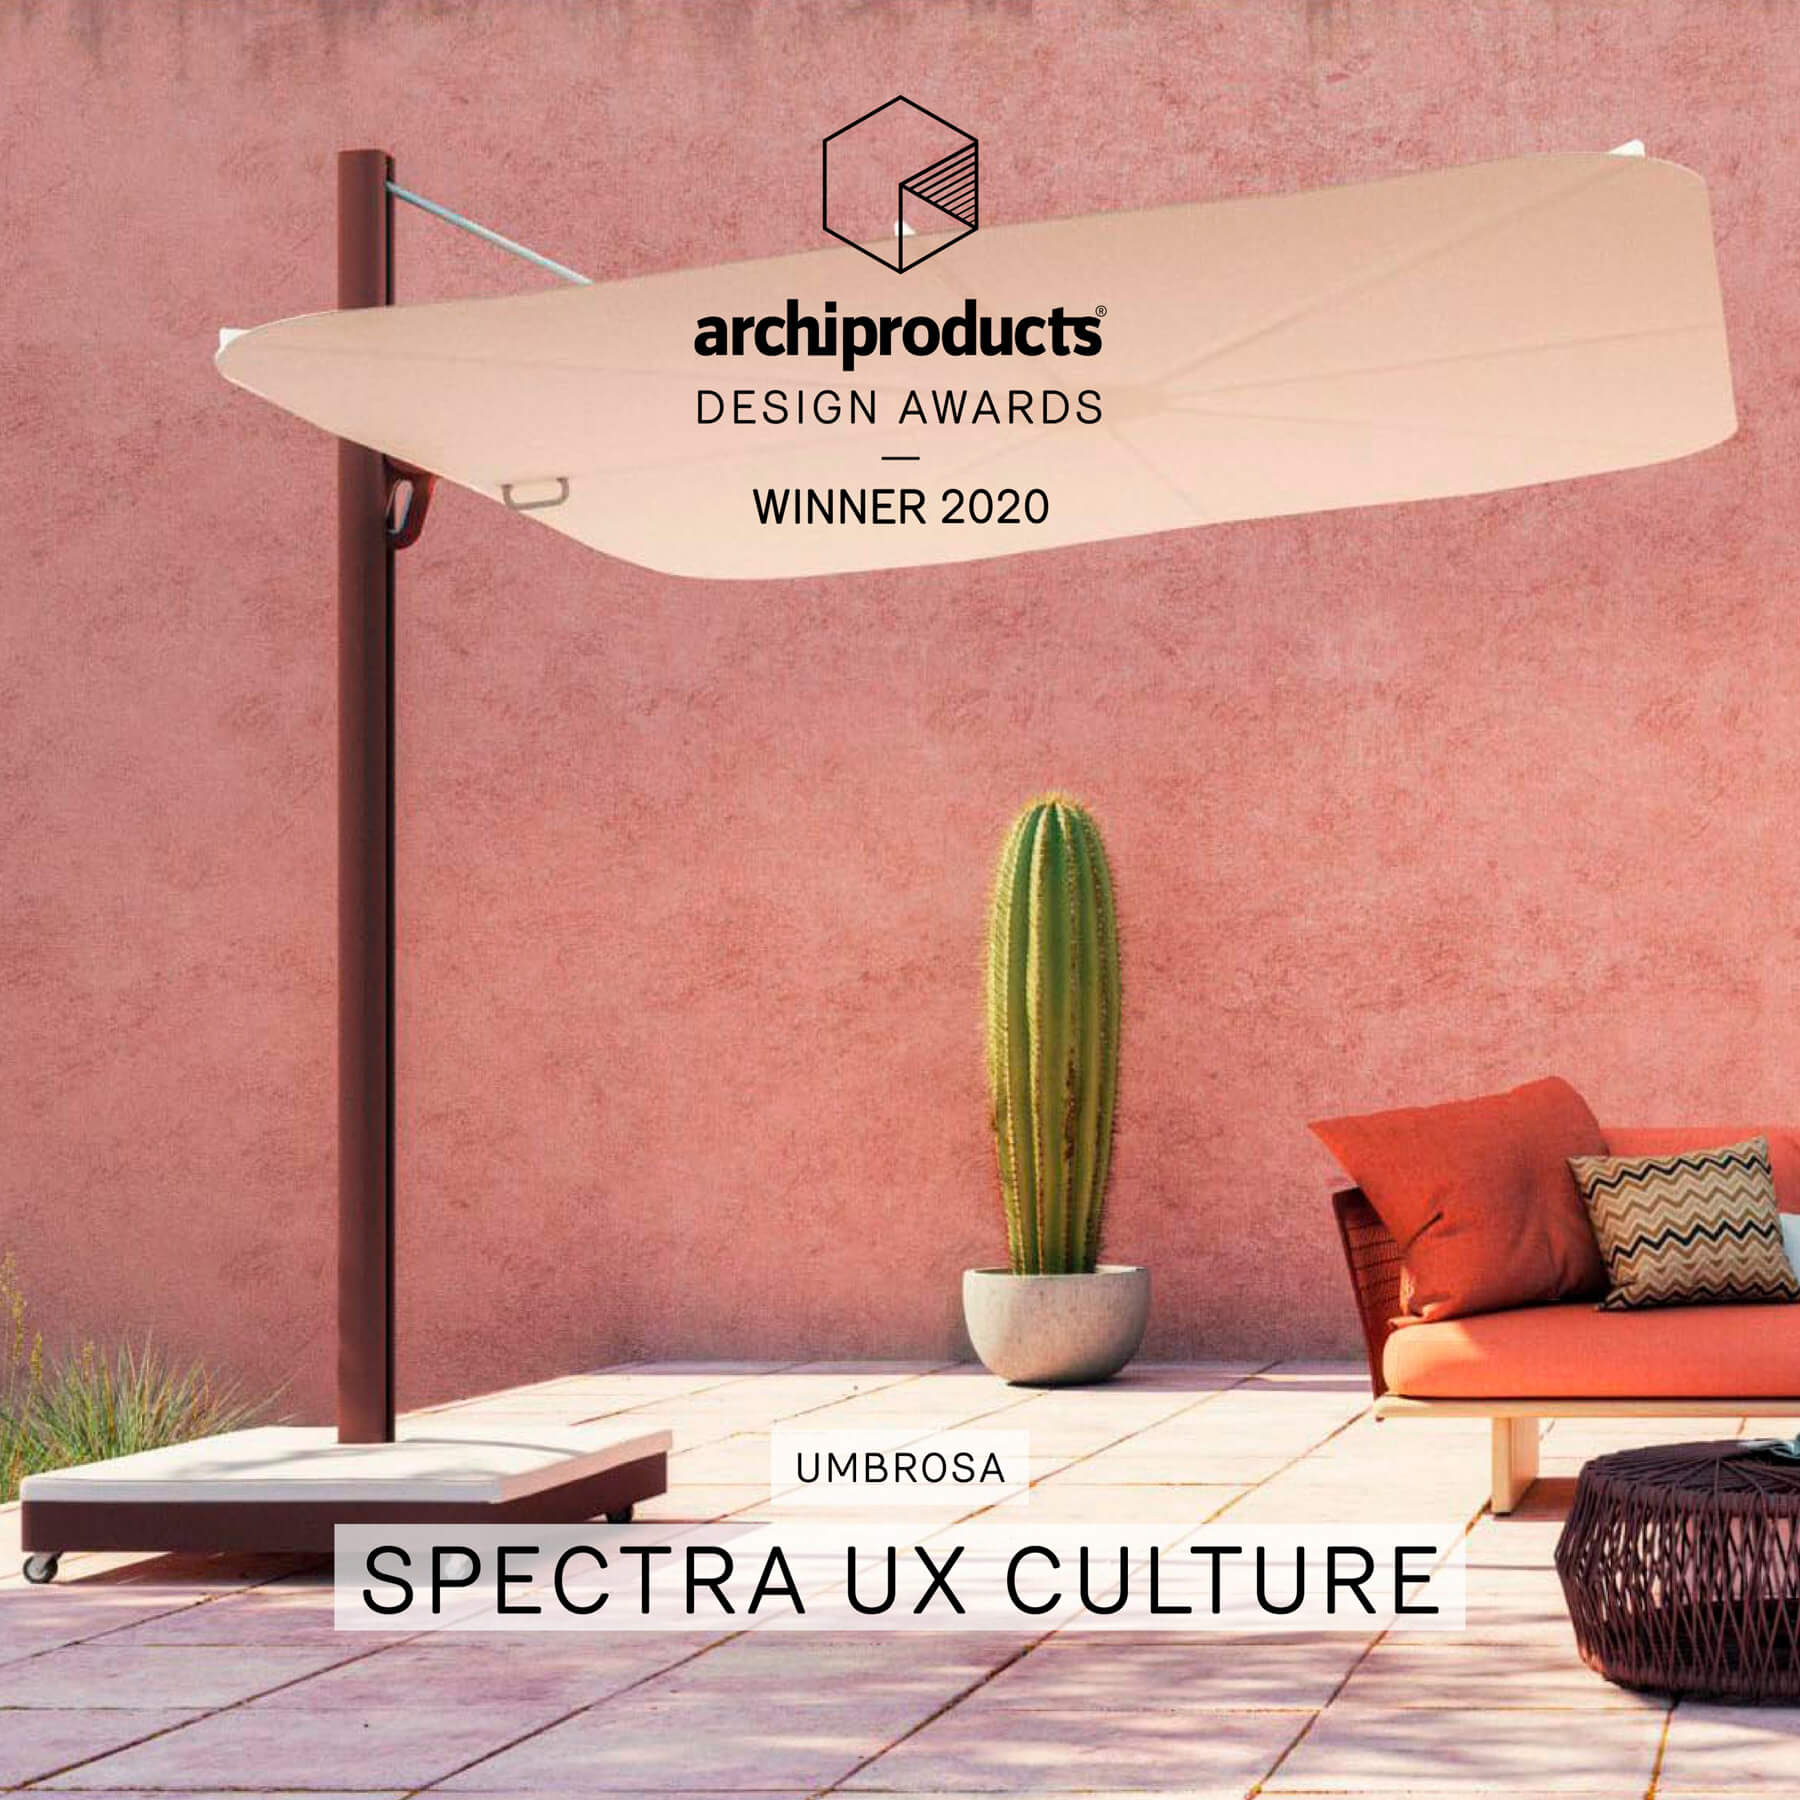 Umbrosa Spectra UX culture - Archiproducts Design Awards 2020